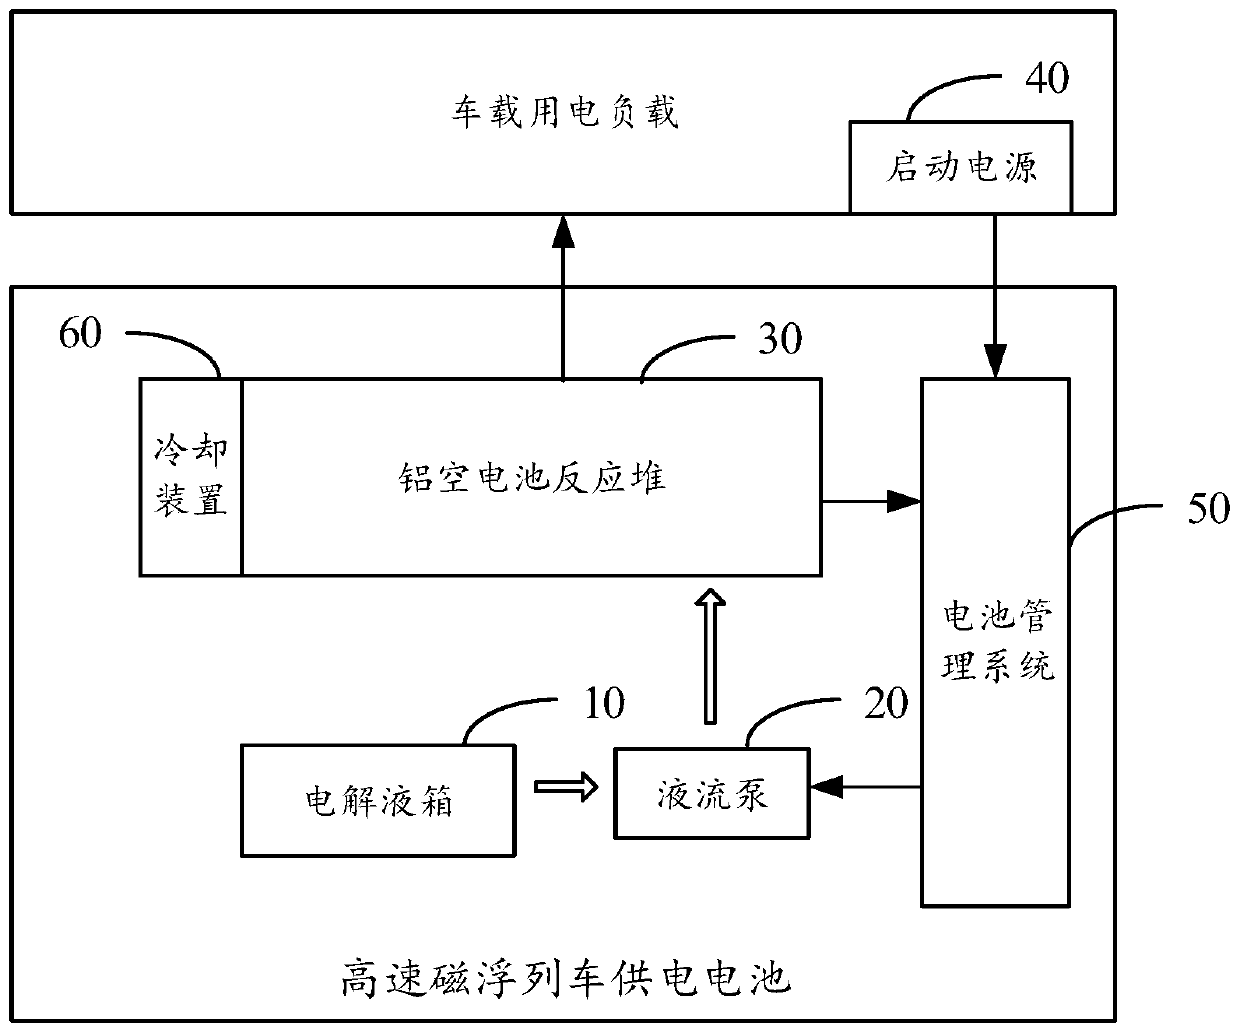 Power supply battery and power supply system for high-speed maglev trains